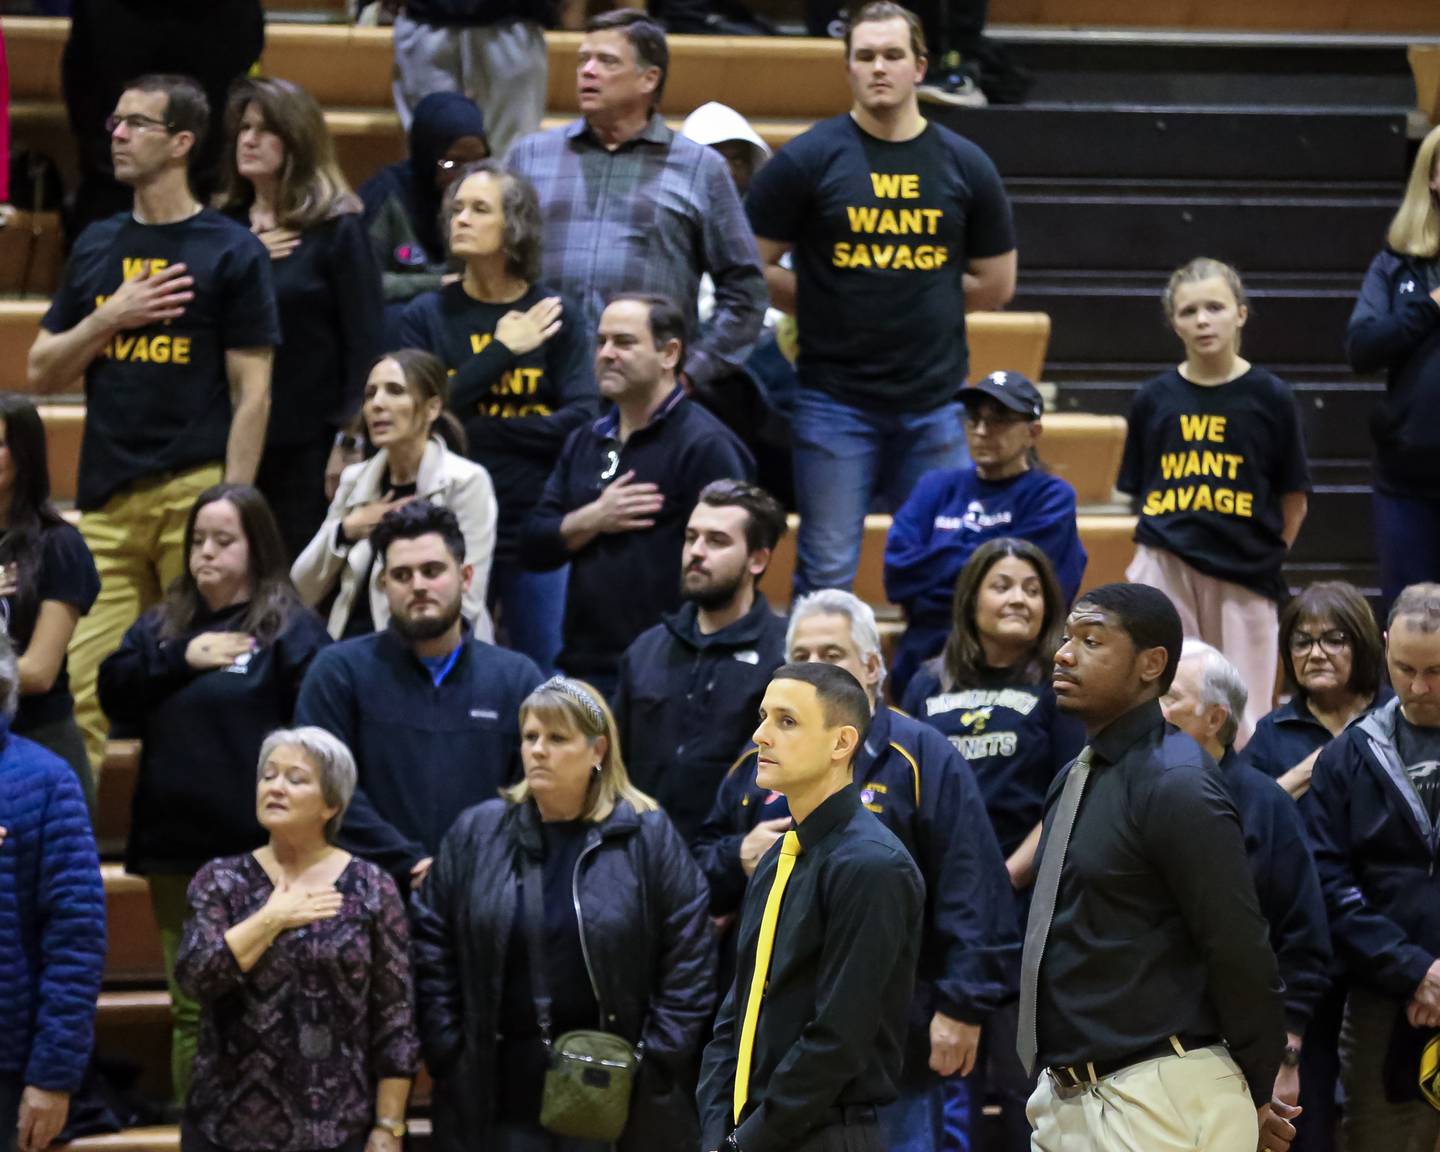 Hinsdale South's head coach Mike Belcaster stands for the playing of the national anthem with supporters of Hinsdale South's Brendan Savage in the background before basketball game between Hinsdale South at Downers Grove South. Dec 1, 2023.